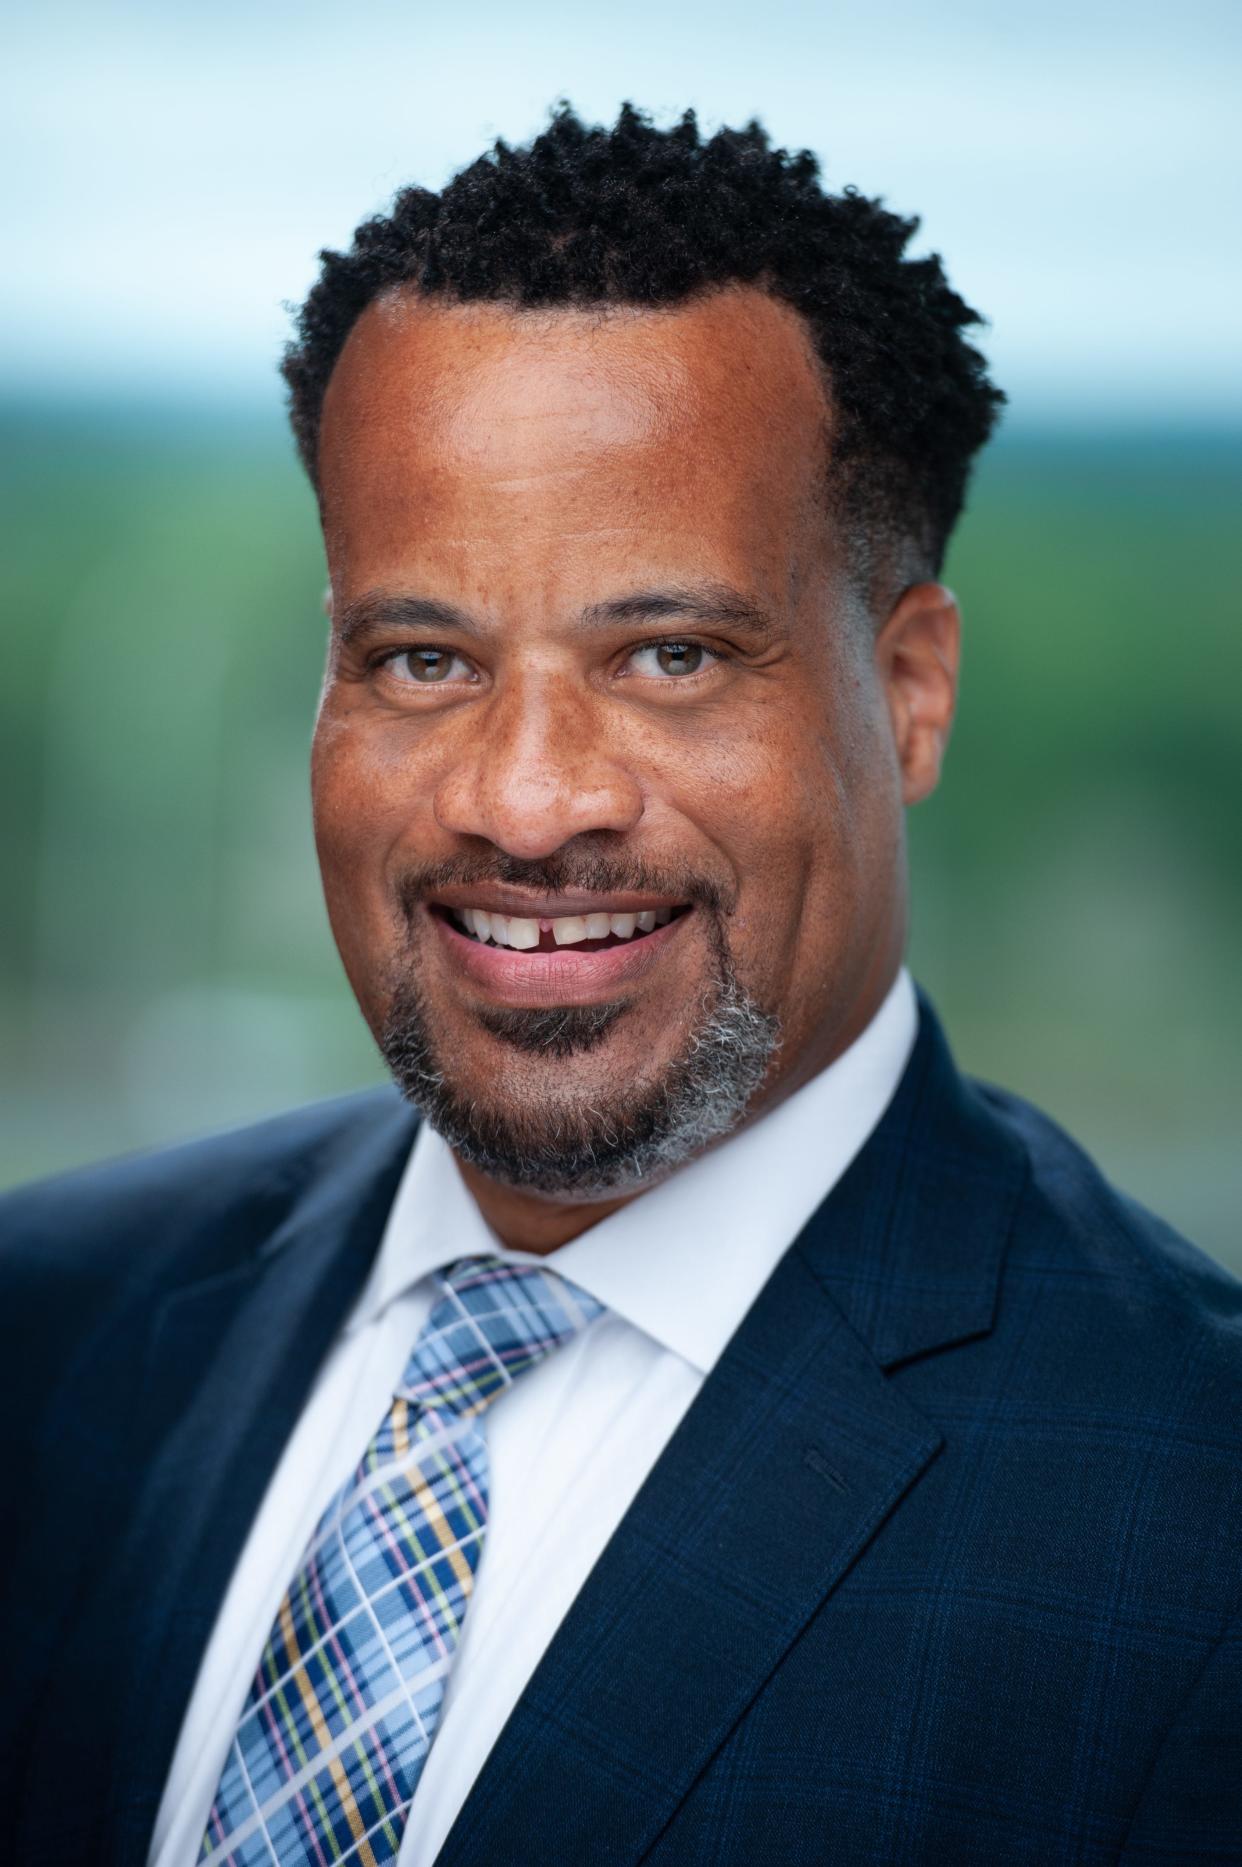 Jay Williams, president of the Hartford Foundation, was named as the Black New England Conference 2022 Citizen of the Year.